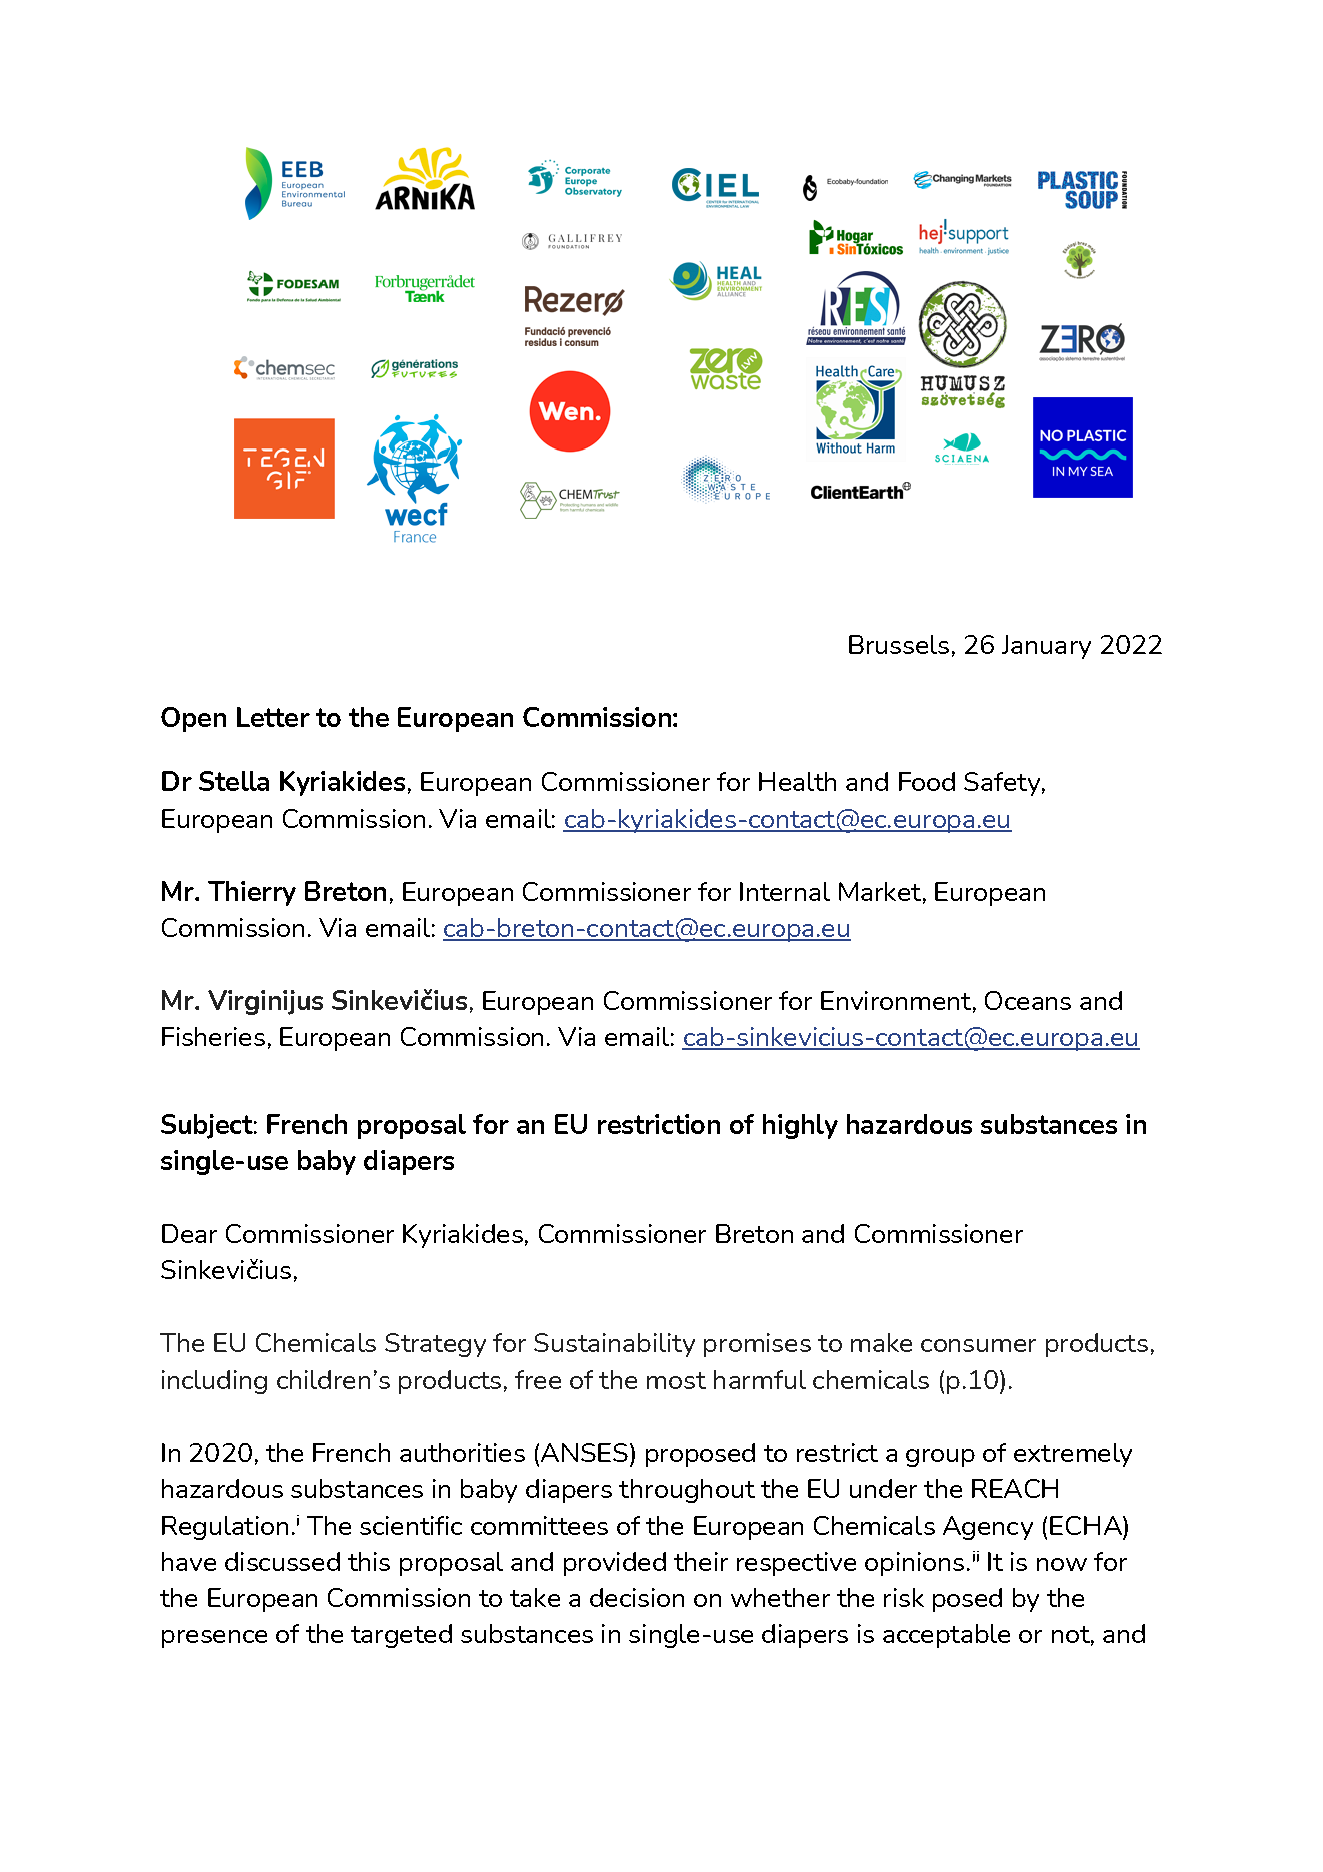 Open Letter to European Commission: French proposal for an EU restriction of highly hazardous substances in single-use baby diapers